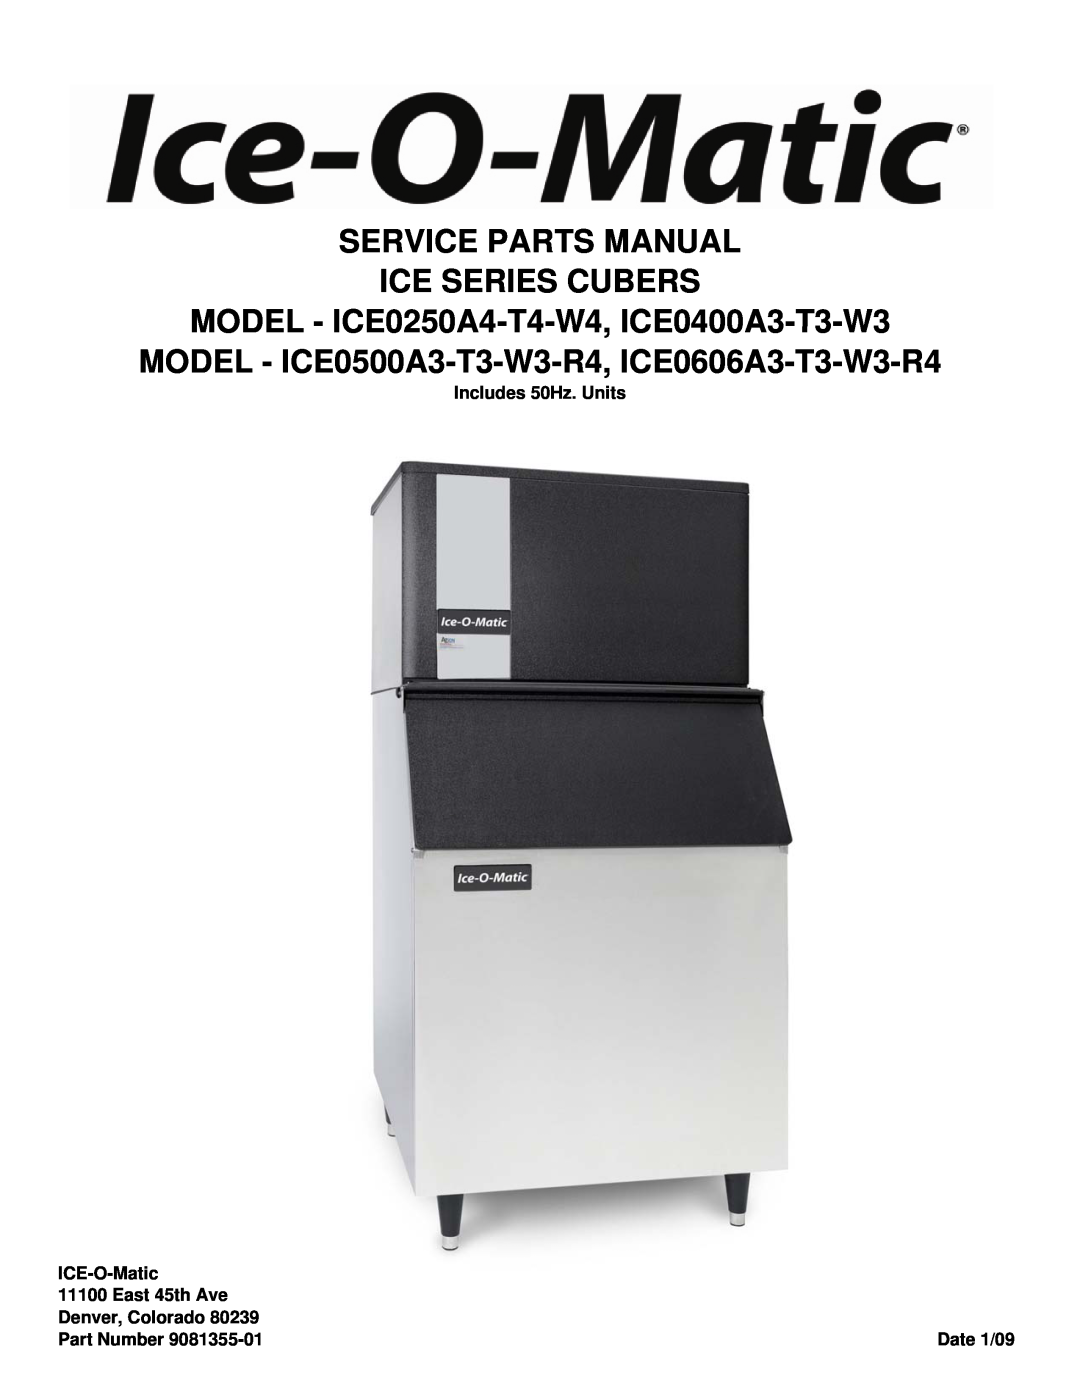 Ice-O-Matic ICE0500A3-T3-W3-R4 manual Service Parts Manual Ice Series Cubers, MODEL - ICE0250A4-T4-W4, ICE0400A3-T3-W3 